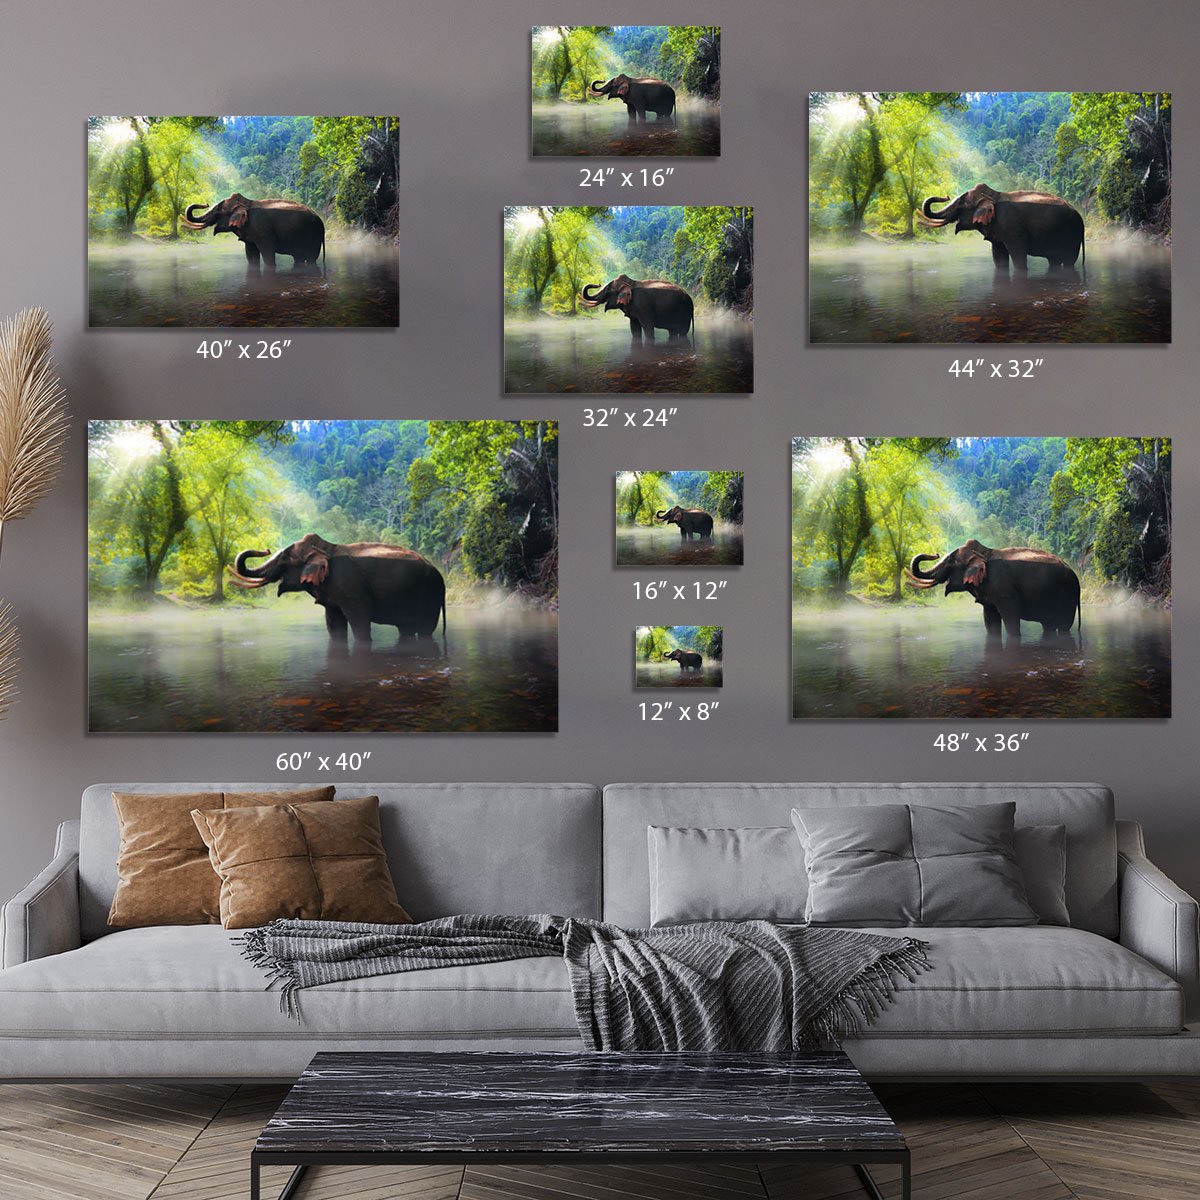 Wild elephant in the beautiful forest Canvas Print or Poster